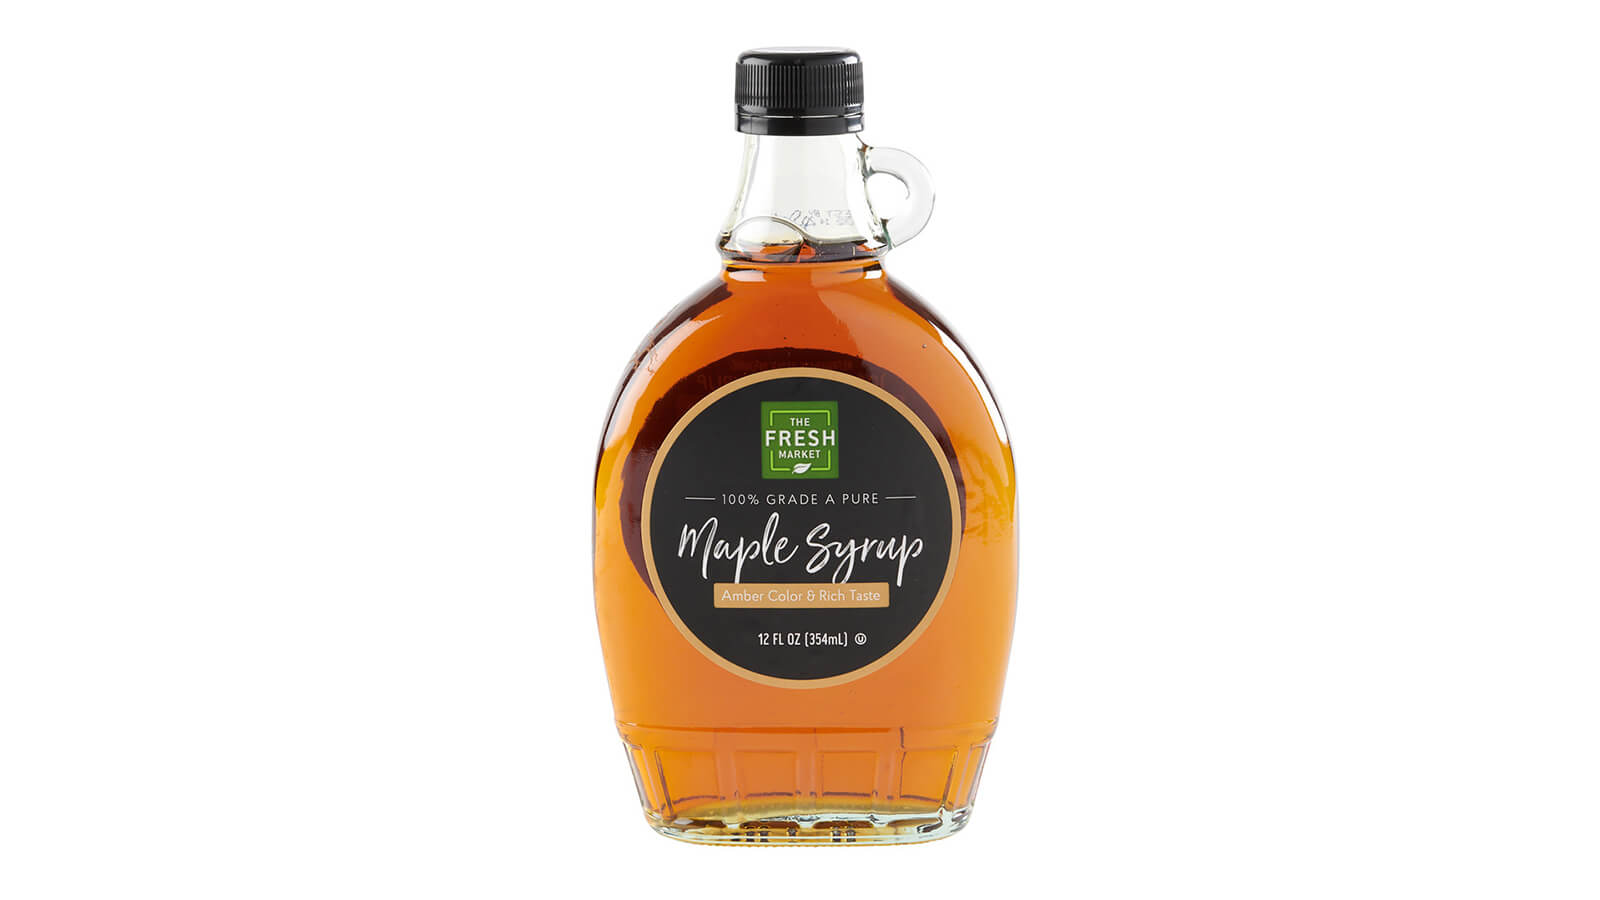 The Fresh Market Maple Syrup